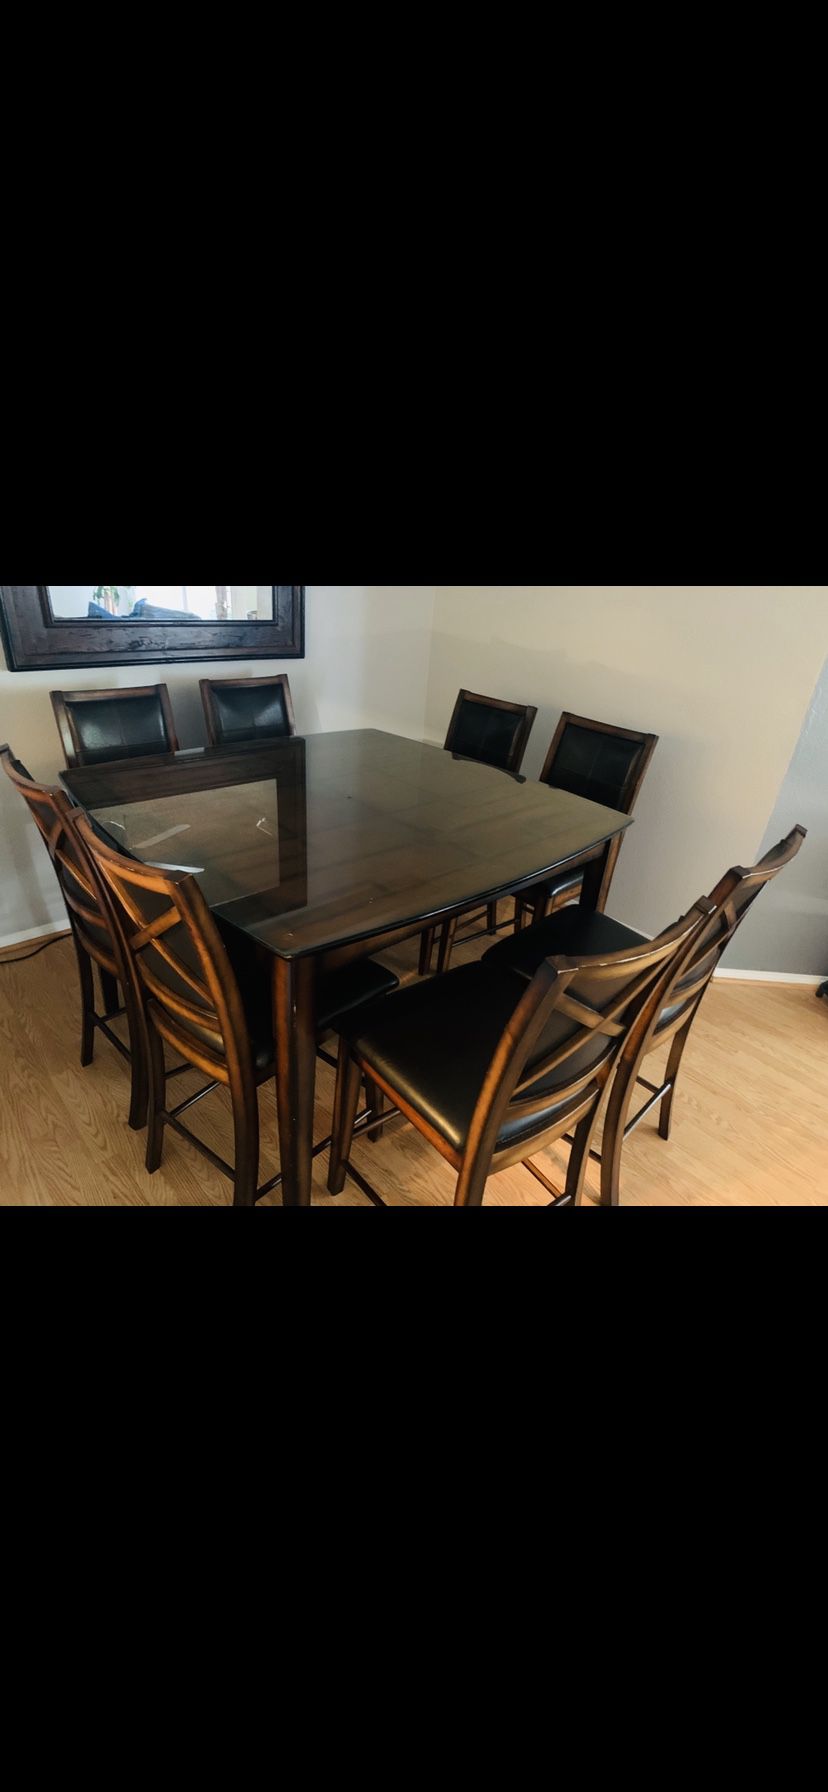 Dining table /8 chairs good condition with custom made thick glass top